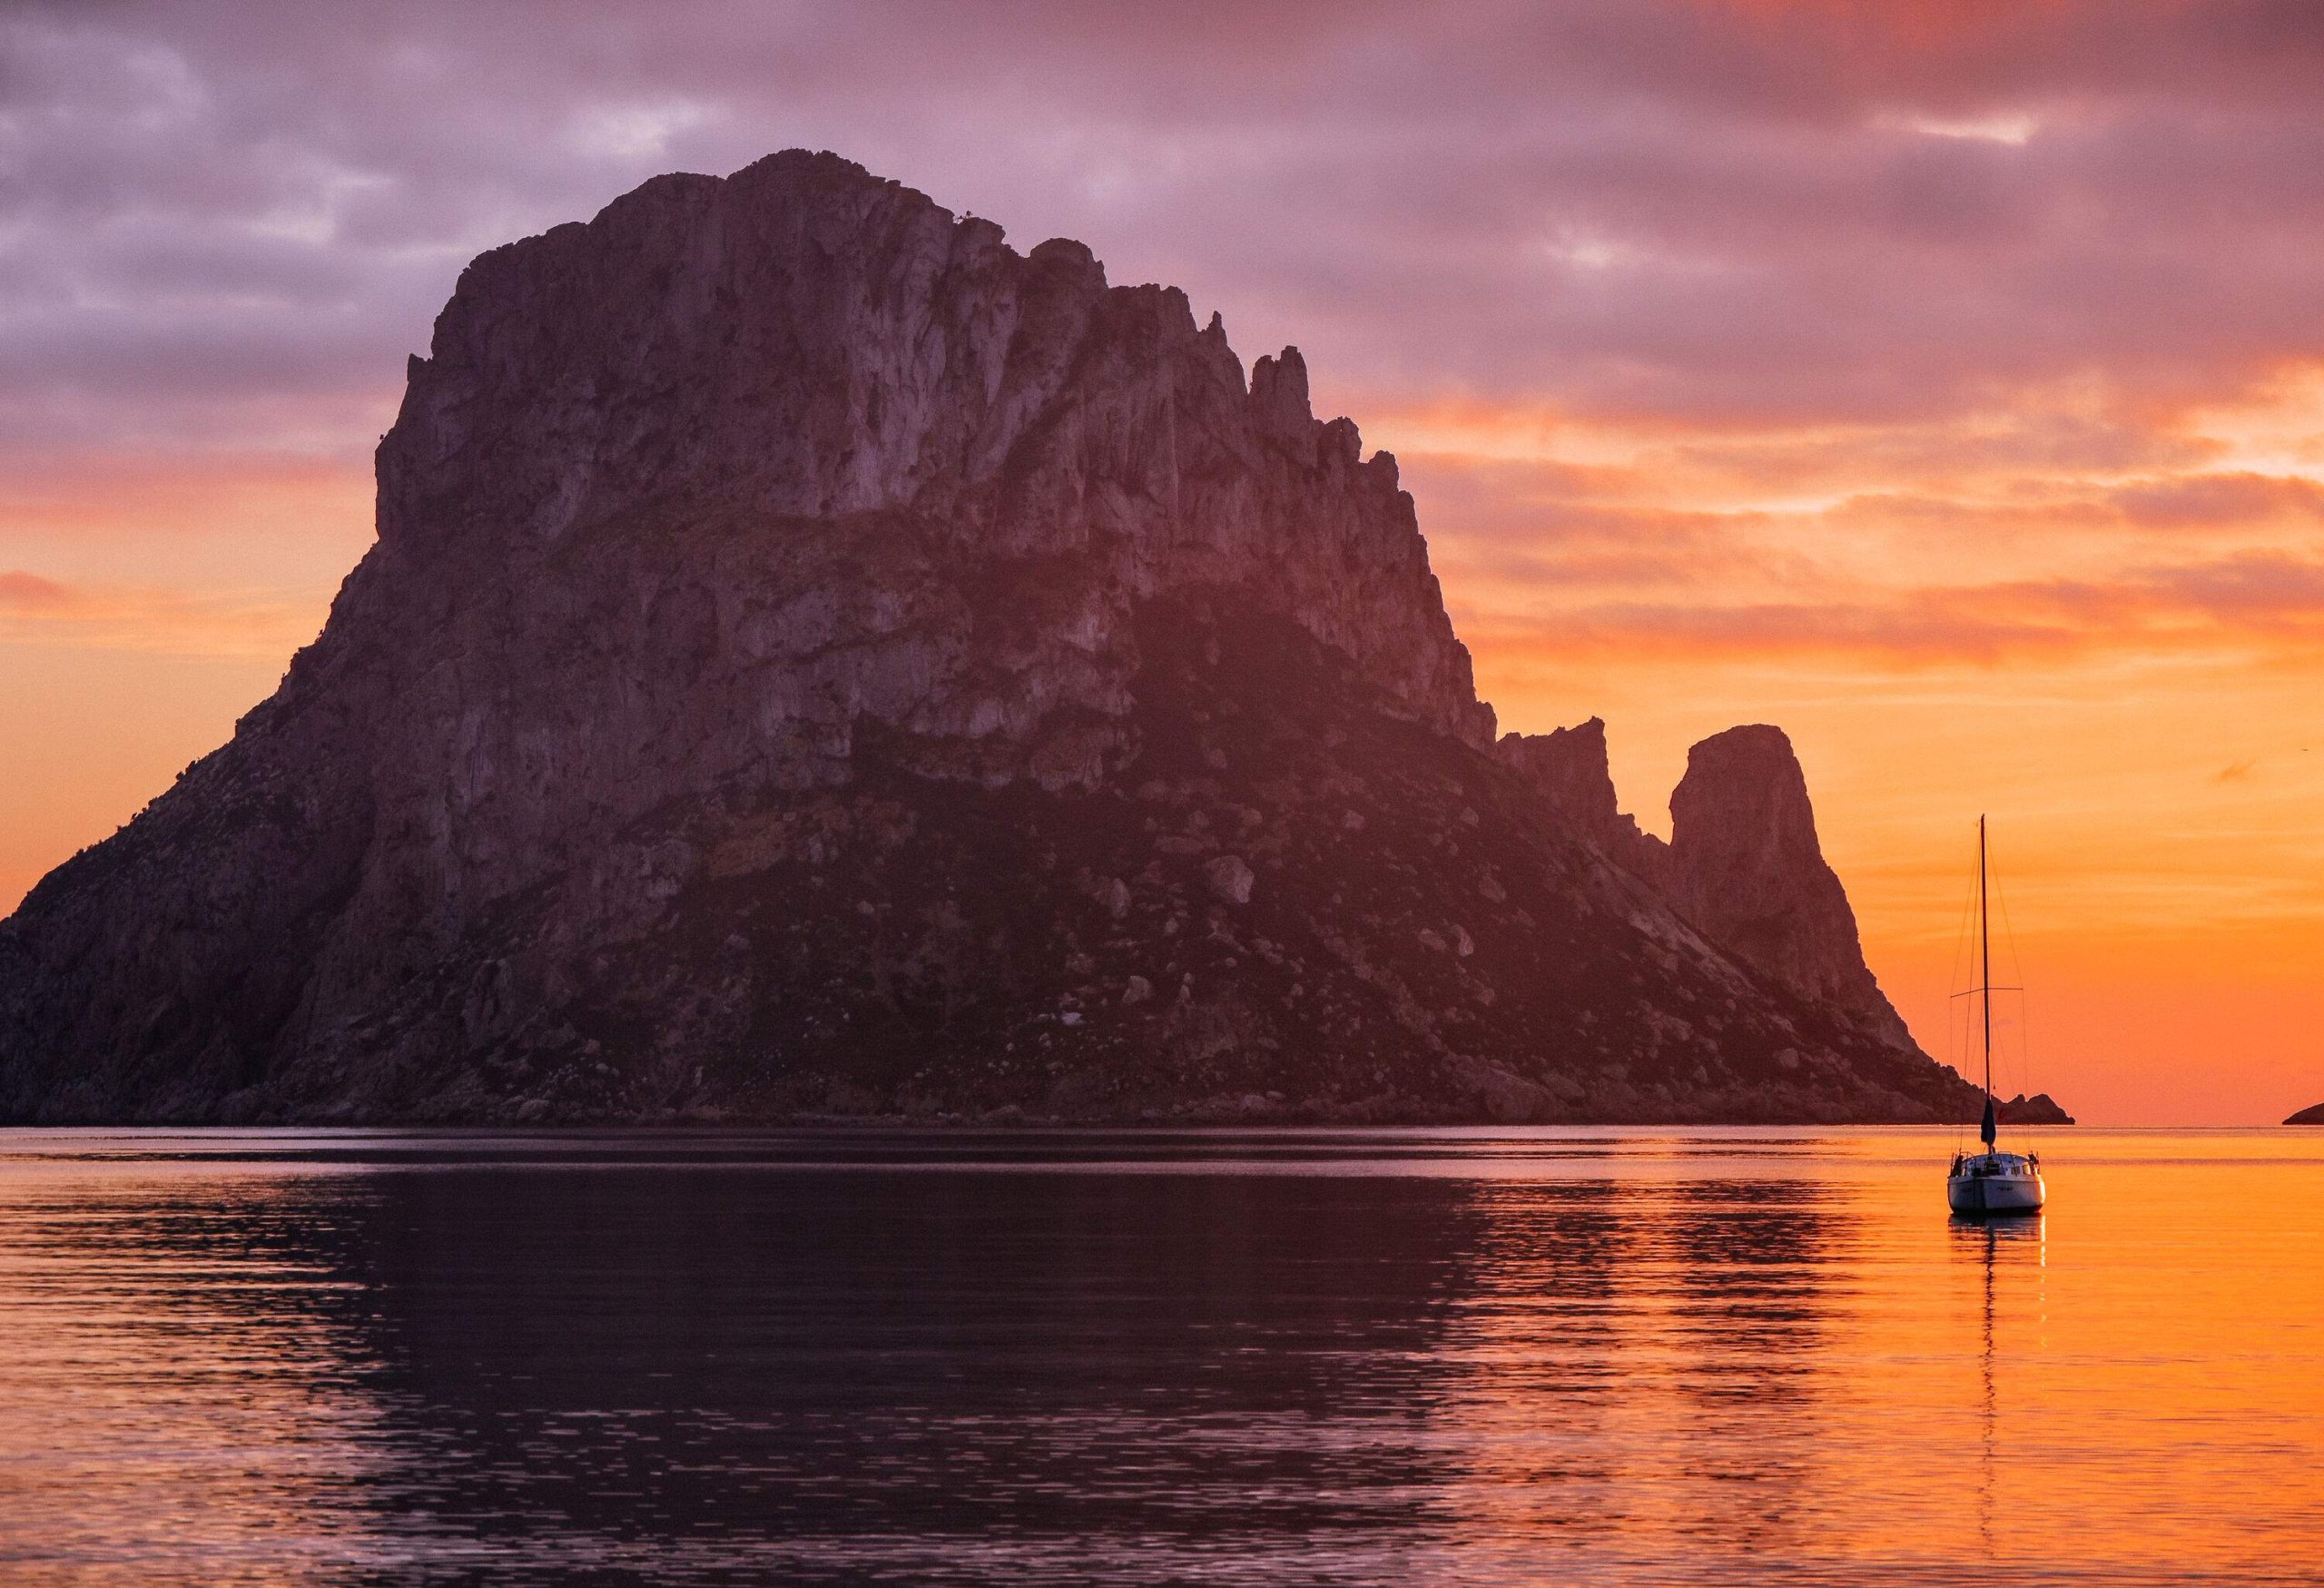 A small boat sailing on calm waters near a steep rocky mountain in the middle of a sea at sunset.